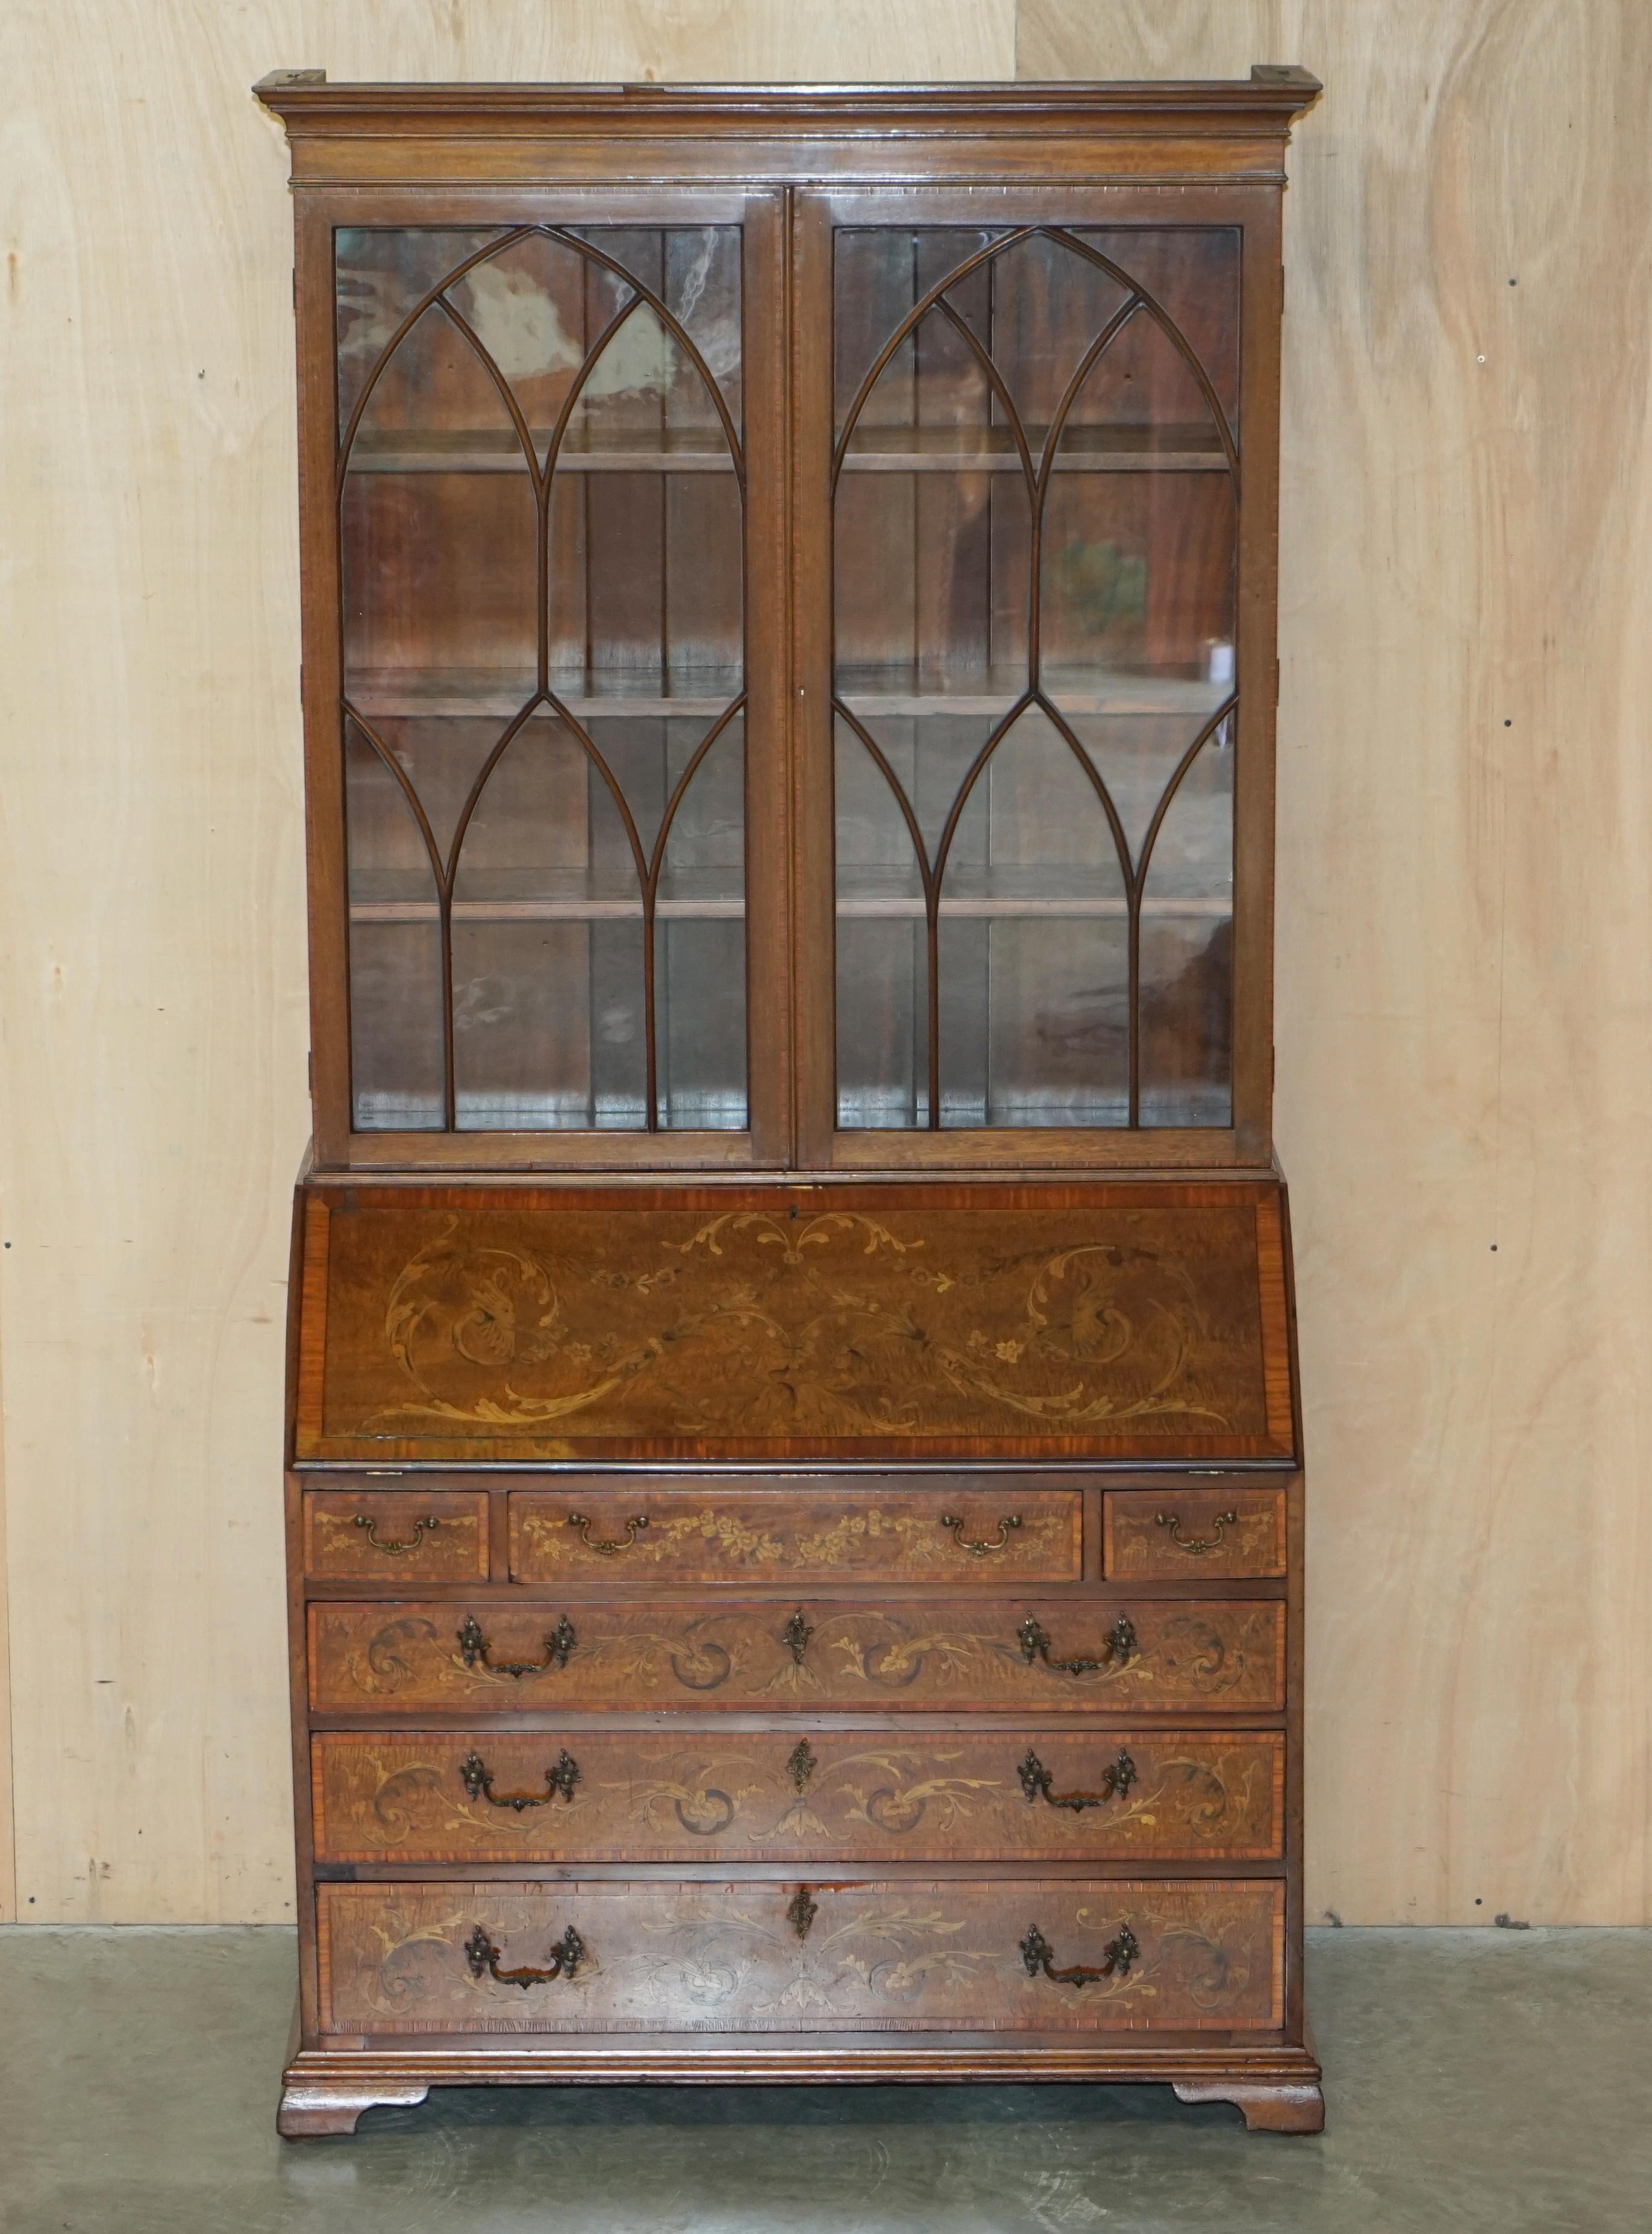 Royal House Antiques

Royal House Antiques is delighted to offer for sale this lovely hand made in England, Sheraton Revival, Library Bureau bookcase circa 1840

Please note the delivery fee listed is just a guide, it covers within the M25 only for